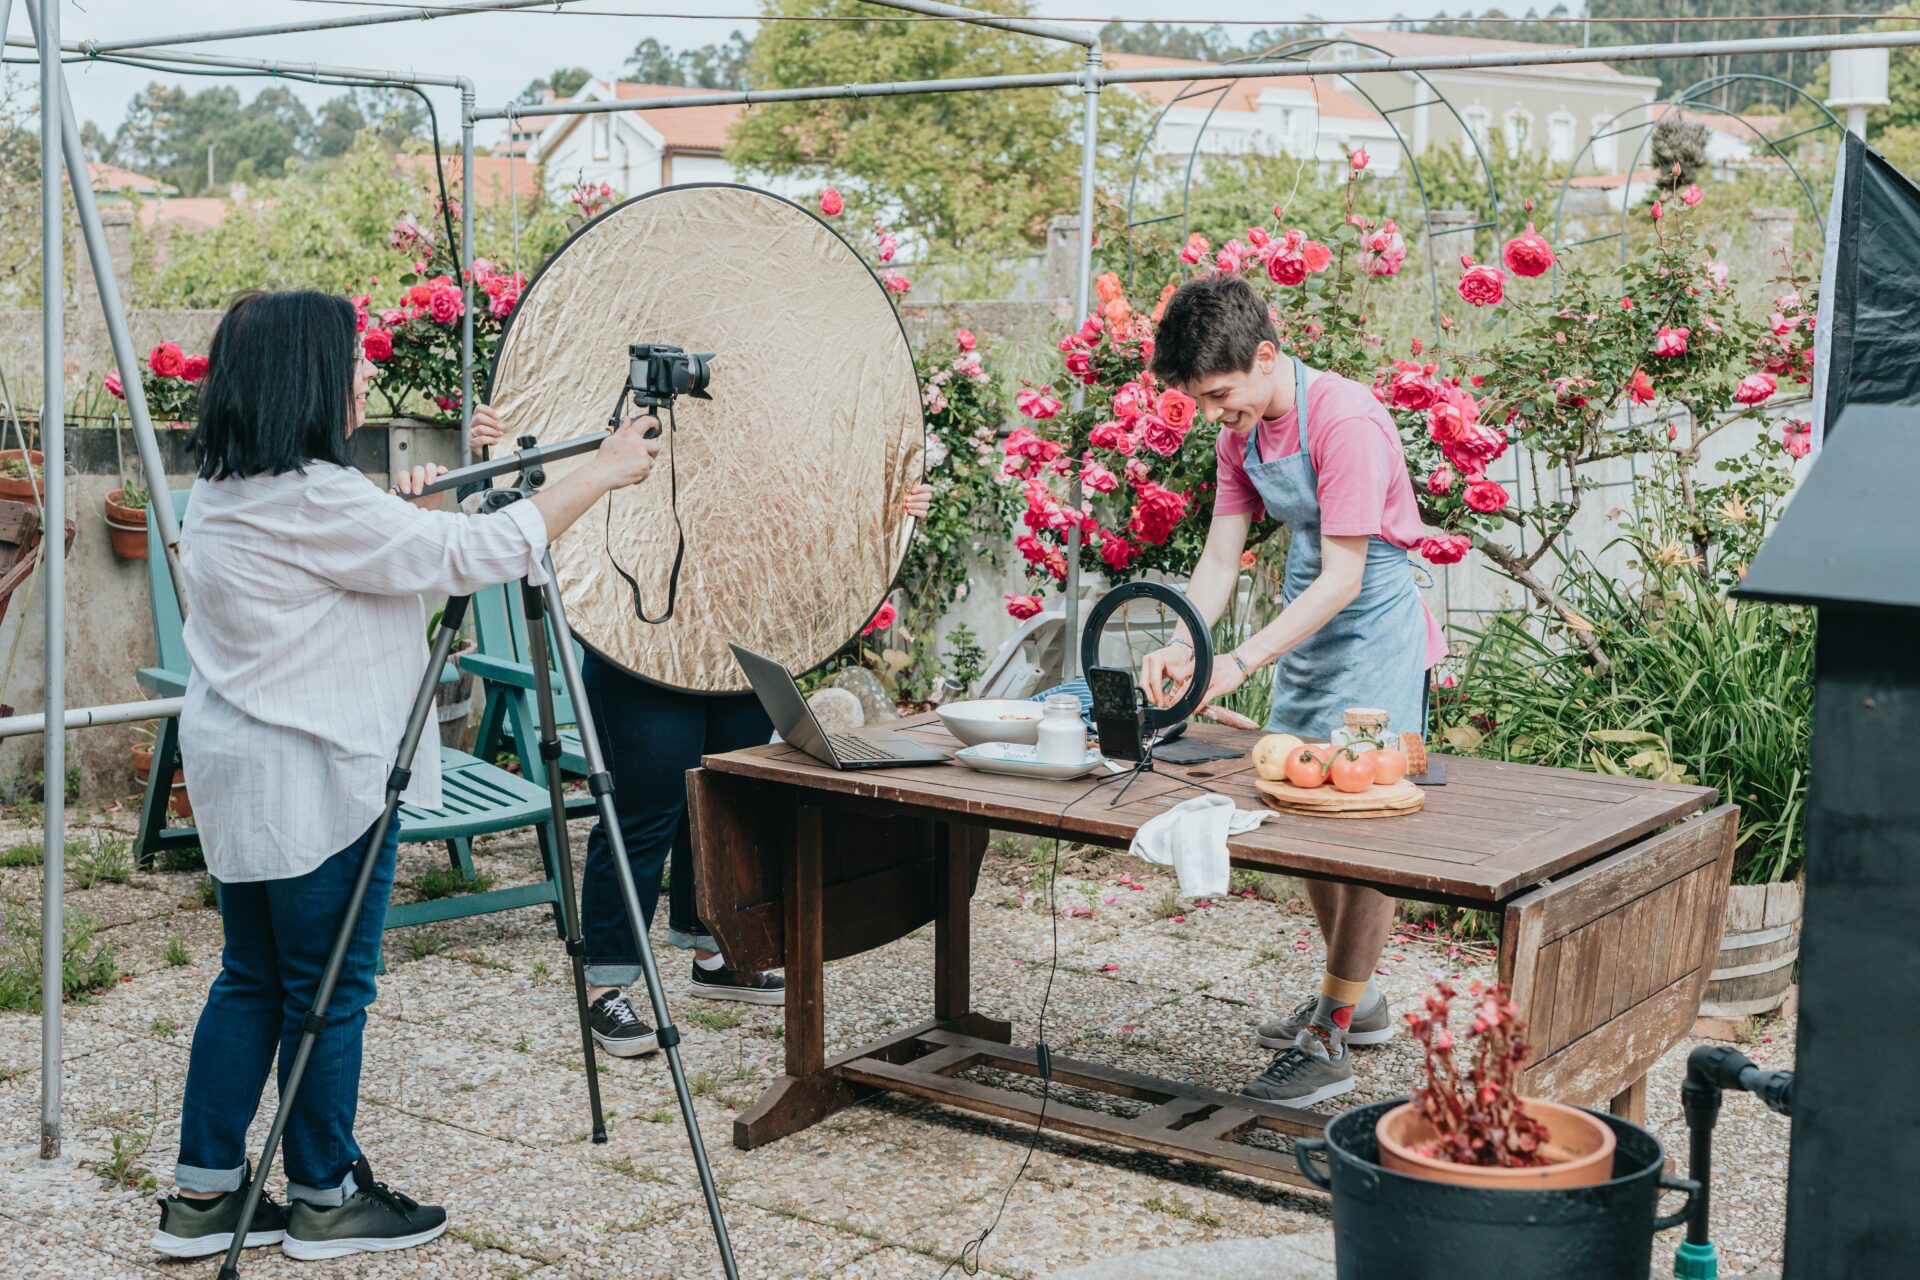 A man sets up a table to cook while women films him.